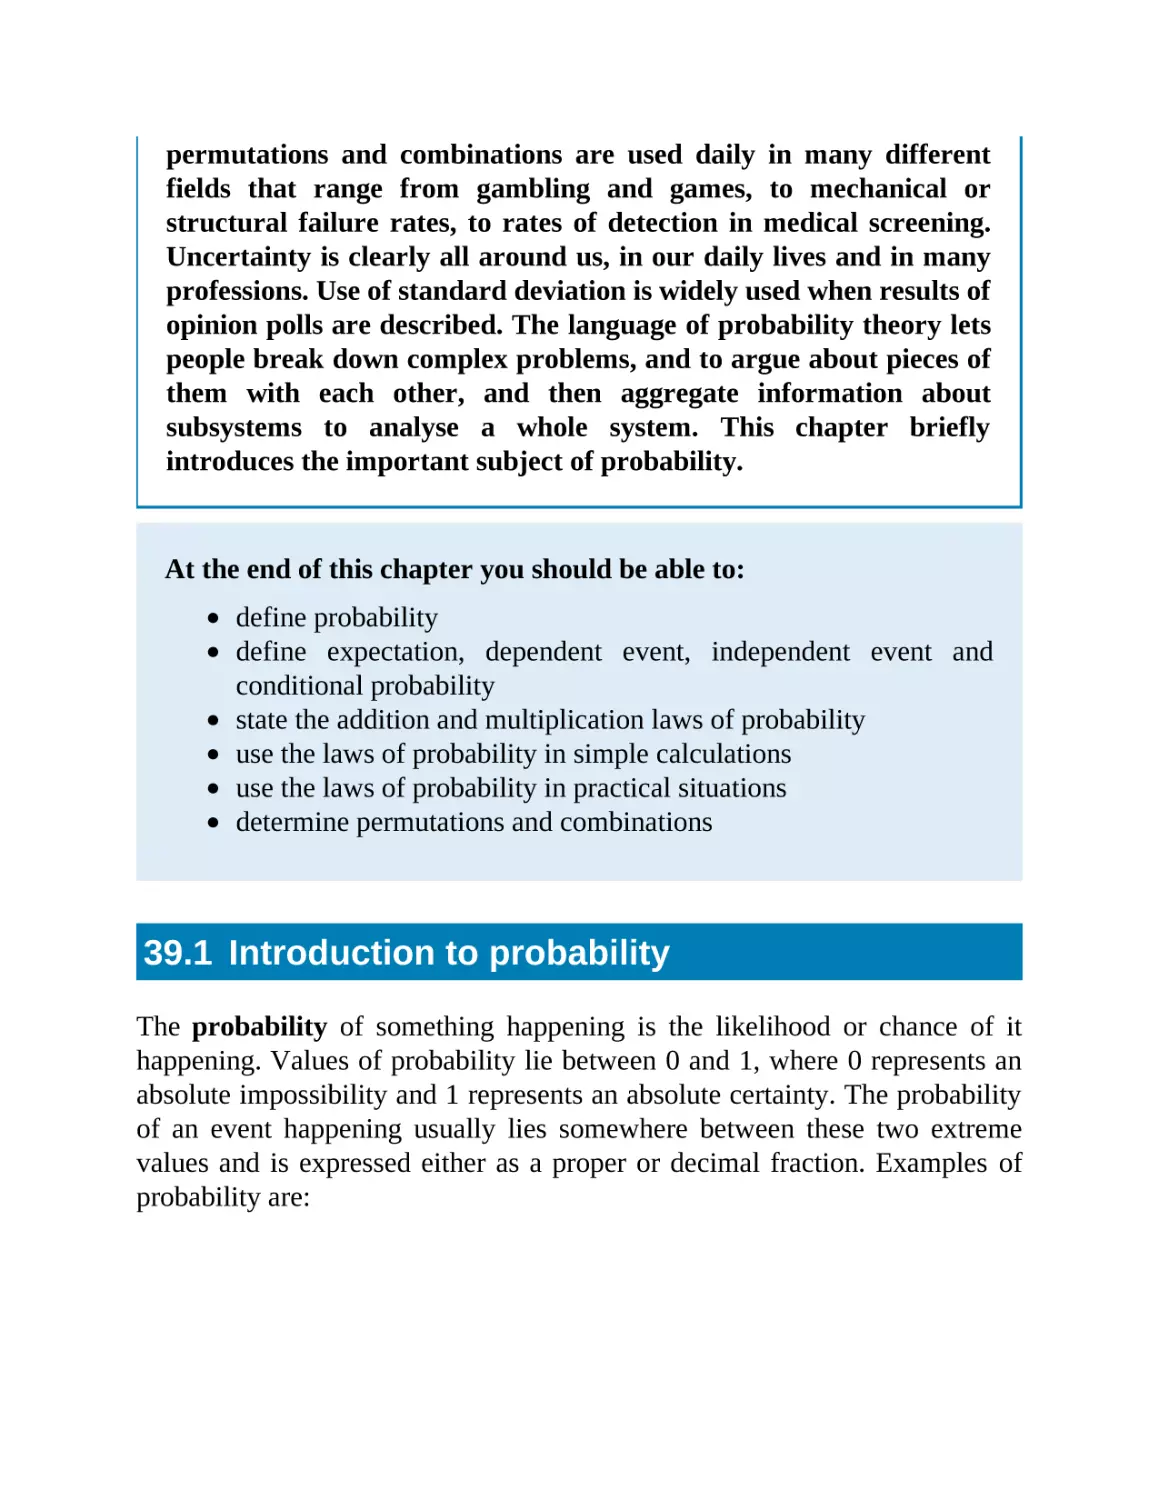 39.1 Introduction to probability